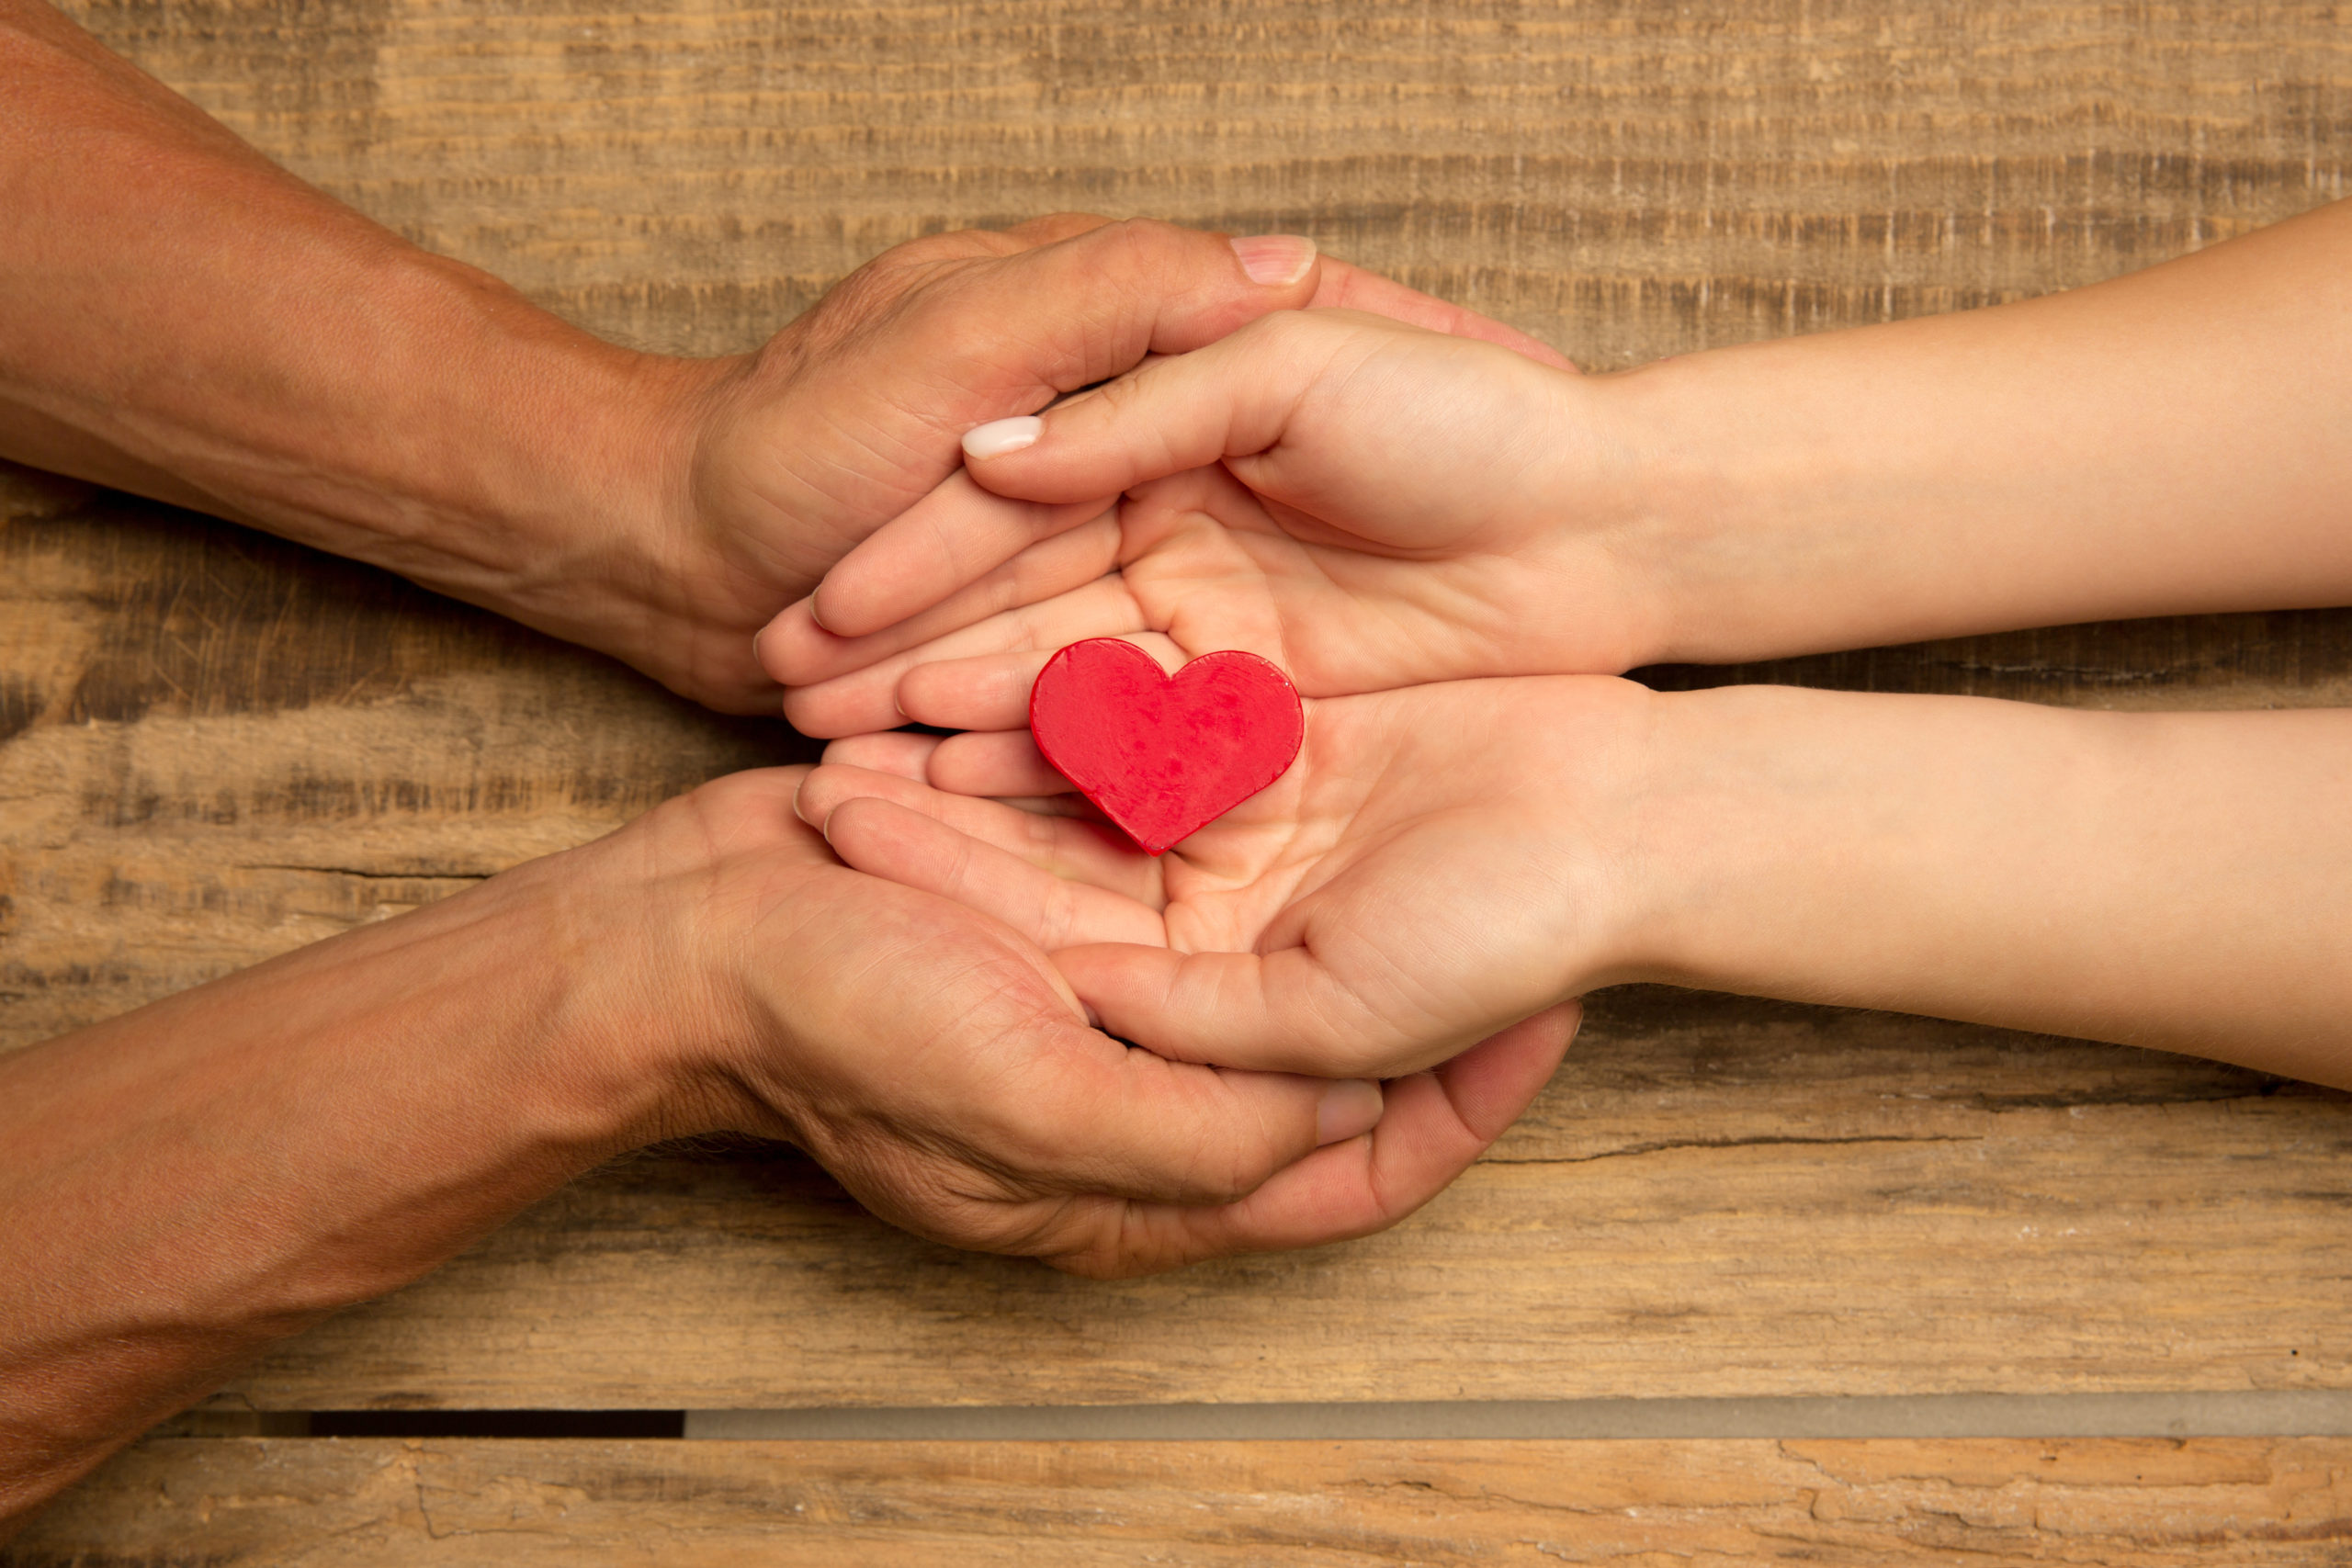 Human hands holding, giving heart isolated on wooden background. Concept of emotions, feelings, charity, family, supporting hand. Thankful, inspirational. Romantic and togetherness.